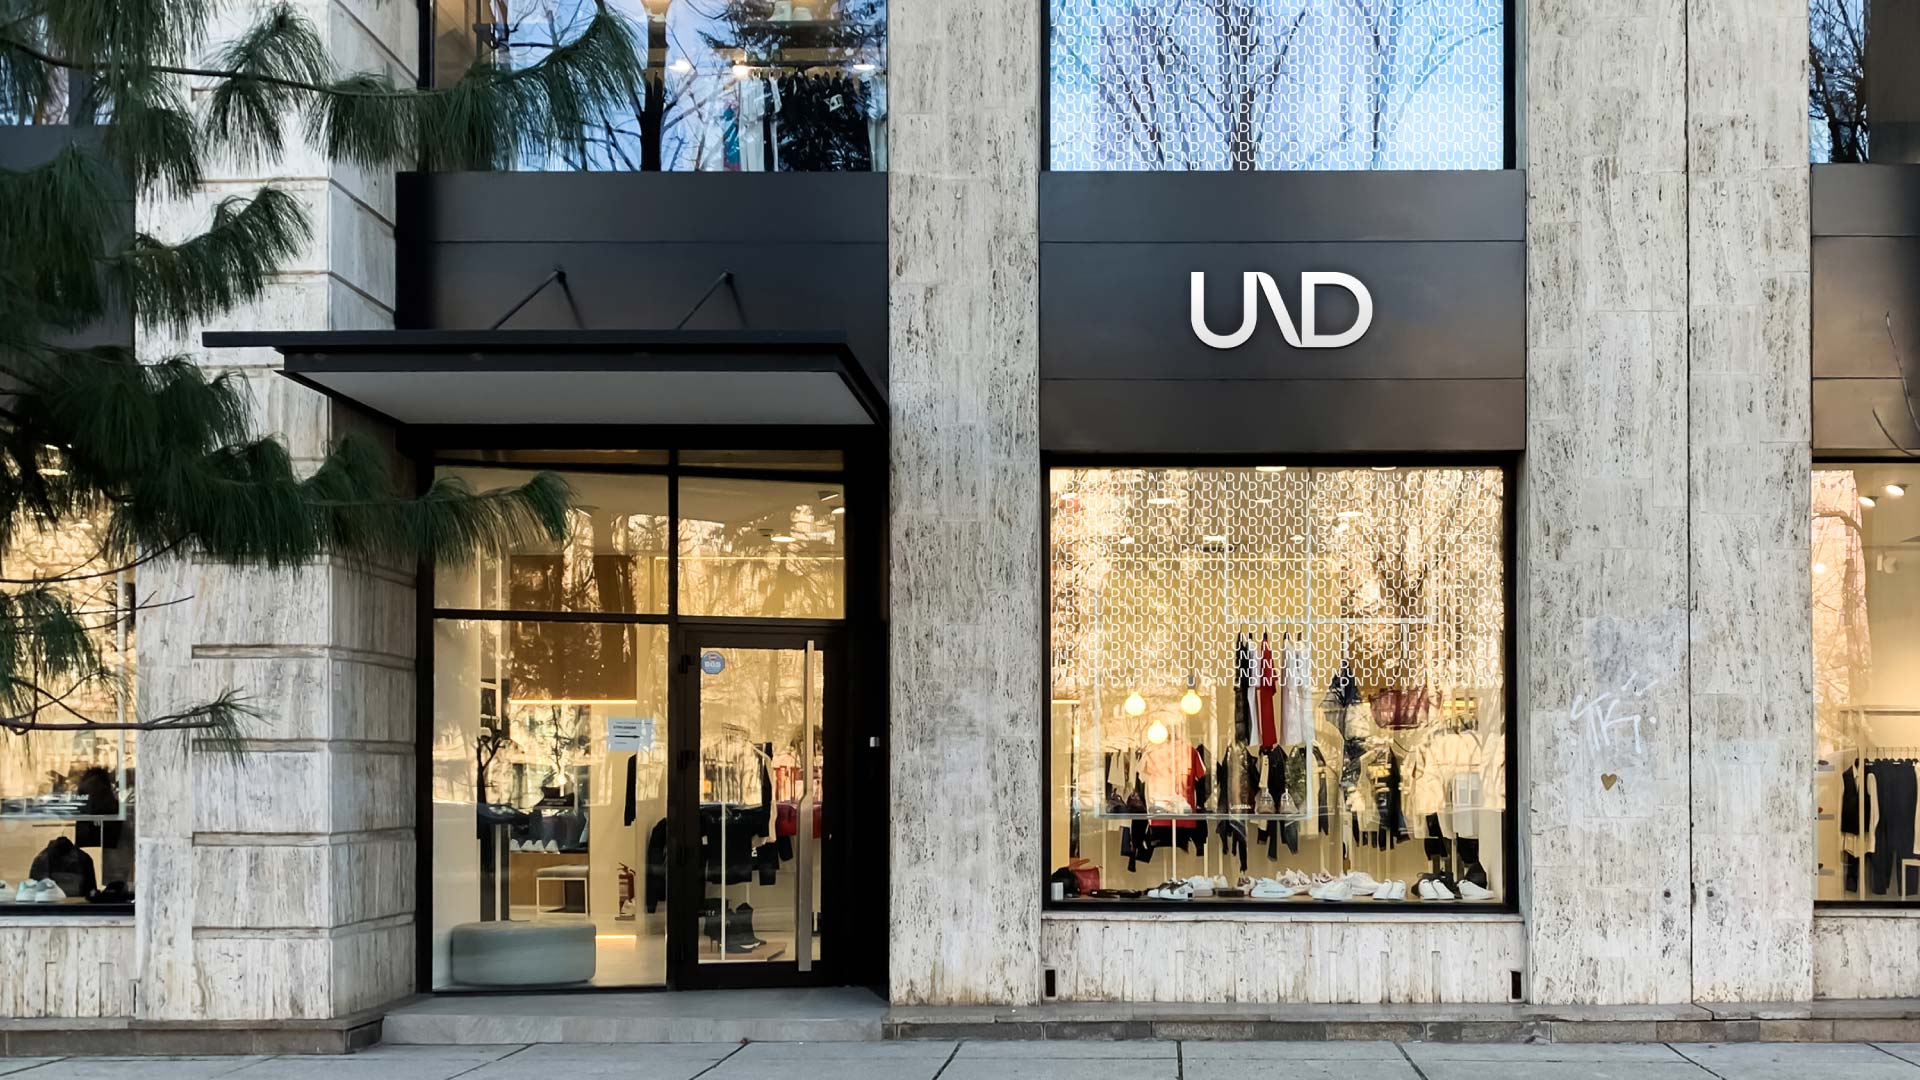 UND branded storefront, using the logo design on the signage and brand pattern on the windows.